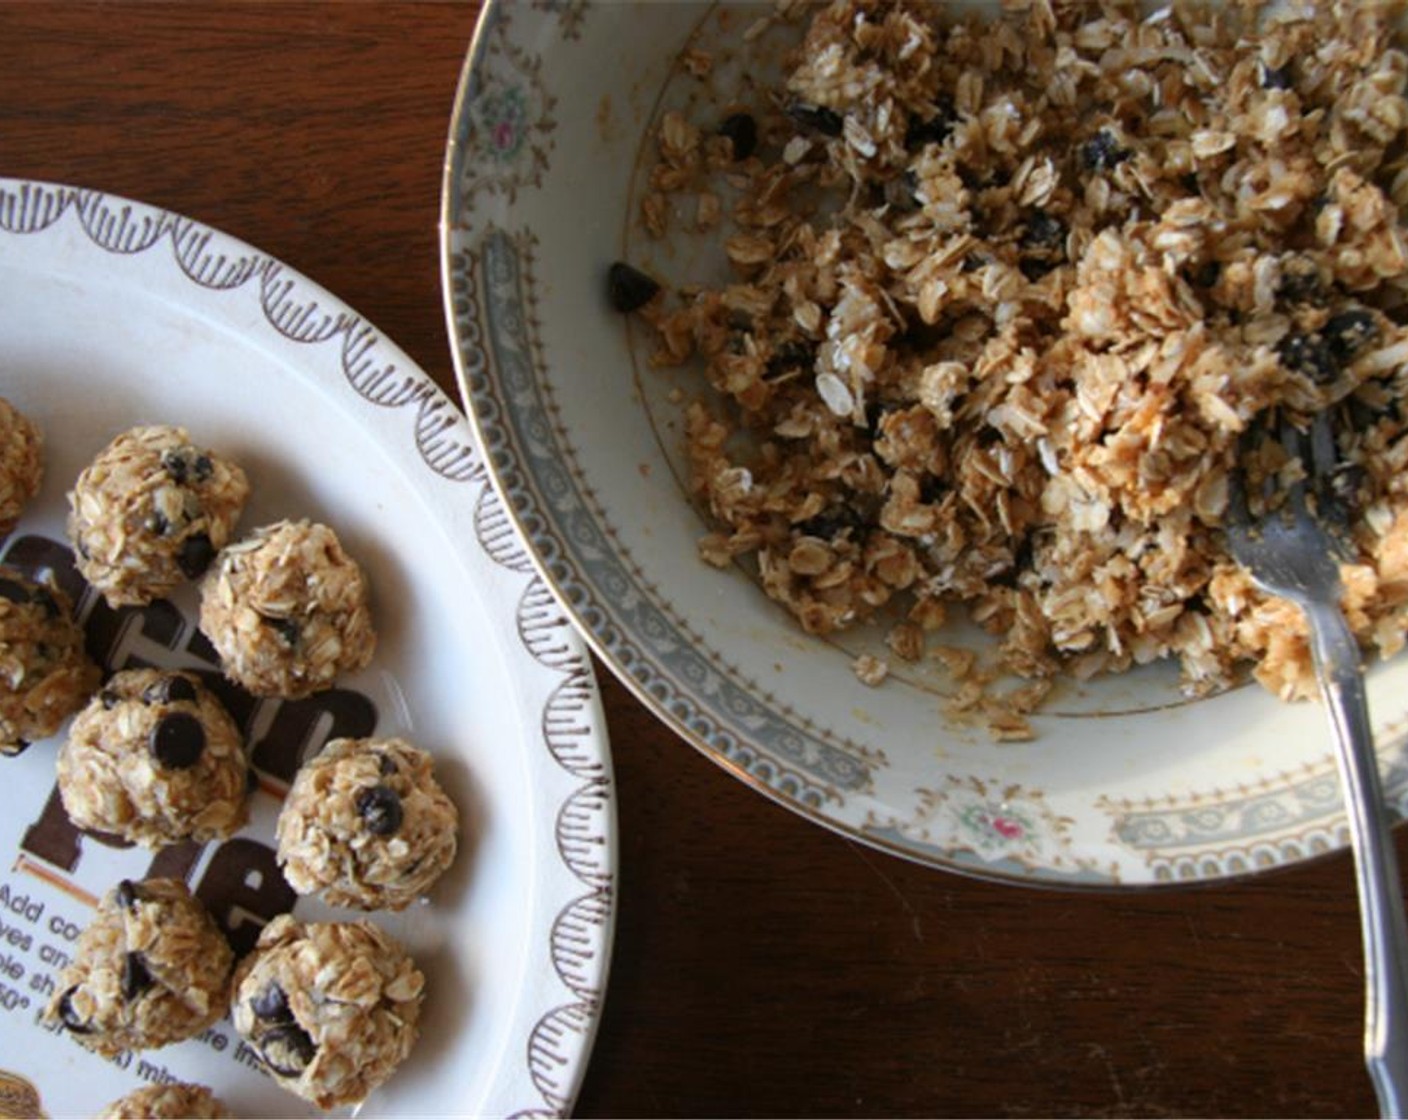 step 2 Measure and add the Oats (1 cup), Peanut Butter (1/2 cup), Unsweetened Shredded Coconut (1/2 cup), chopped walnuts, Honey (1/4 cup), and Chocolate Chips (1/4 cup) to a large bowl. Stir well until all of the oats are coated.